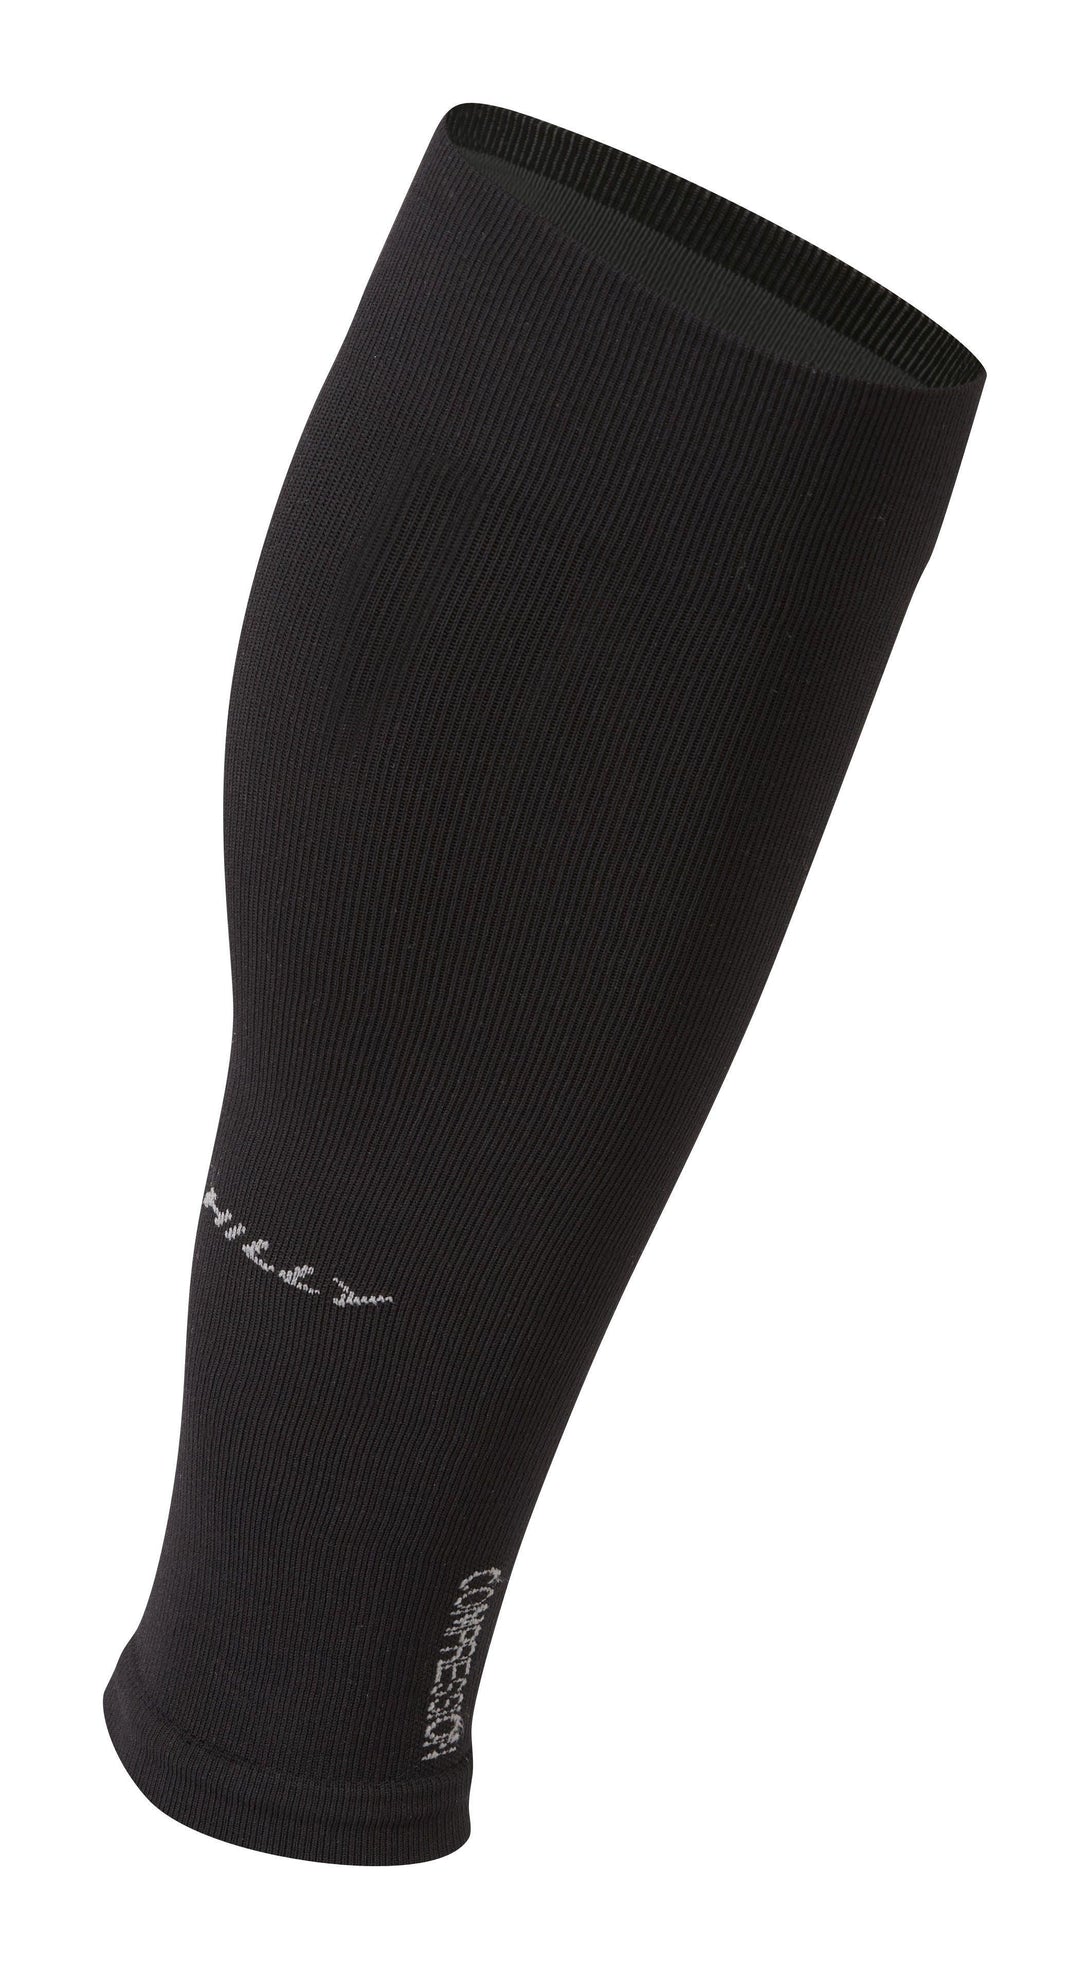 Rugby Heaven Hilly Pulse Compression Sleeve Zero Black/Grey - www.rugby-heaven.co.uk